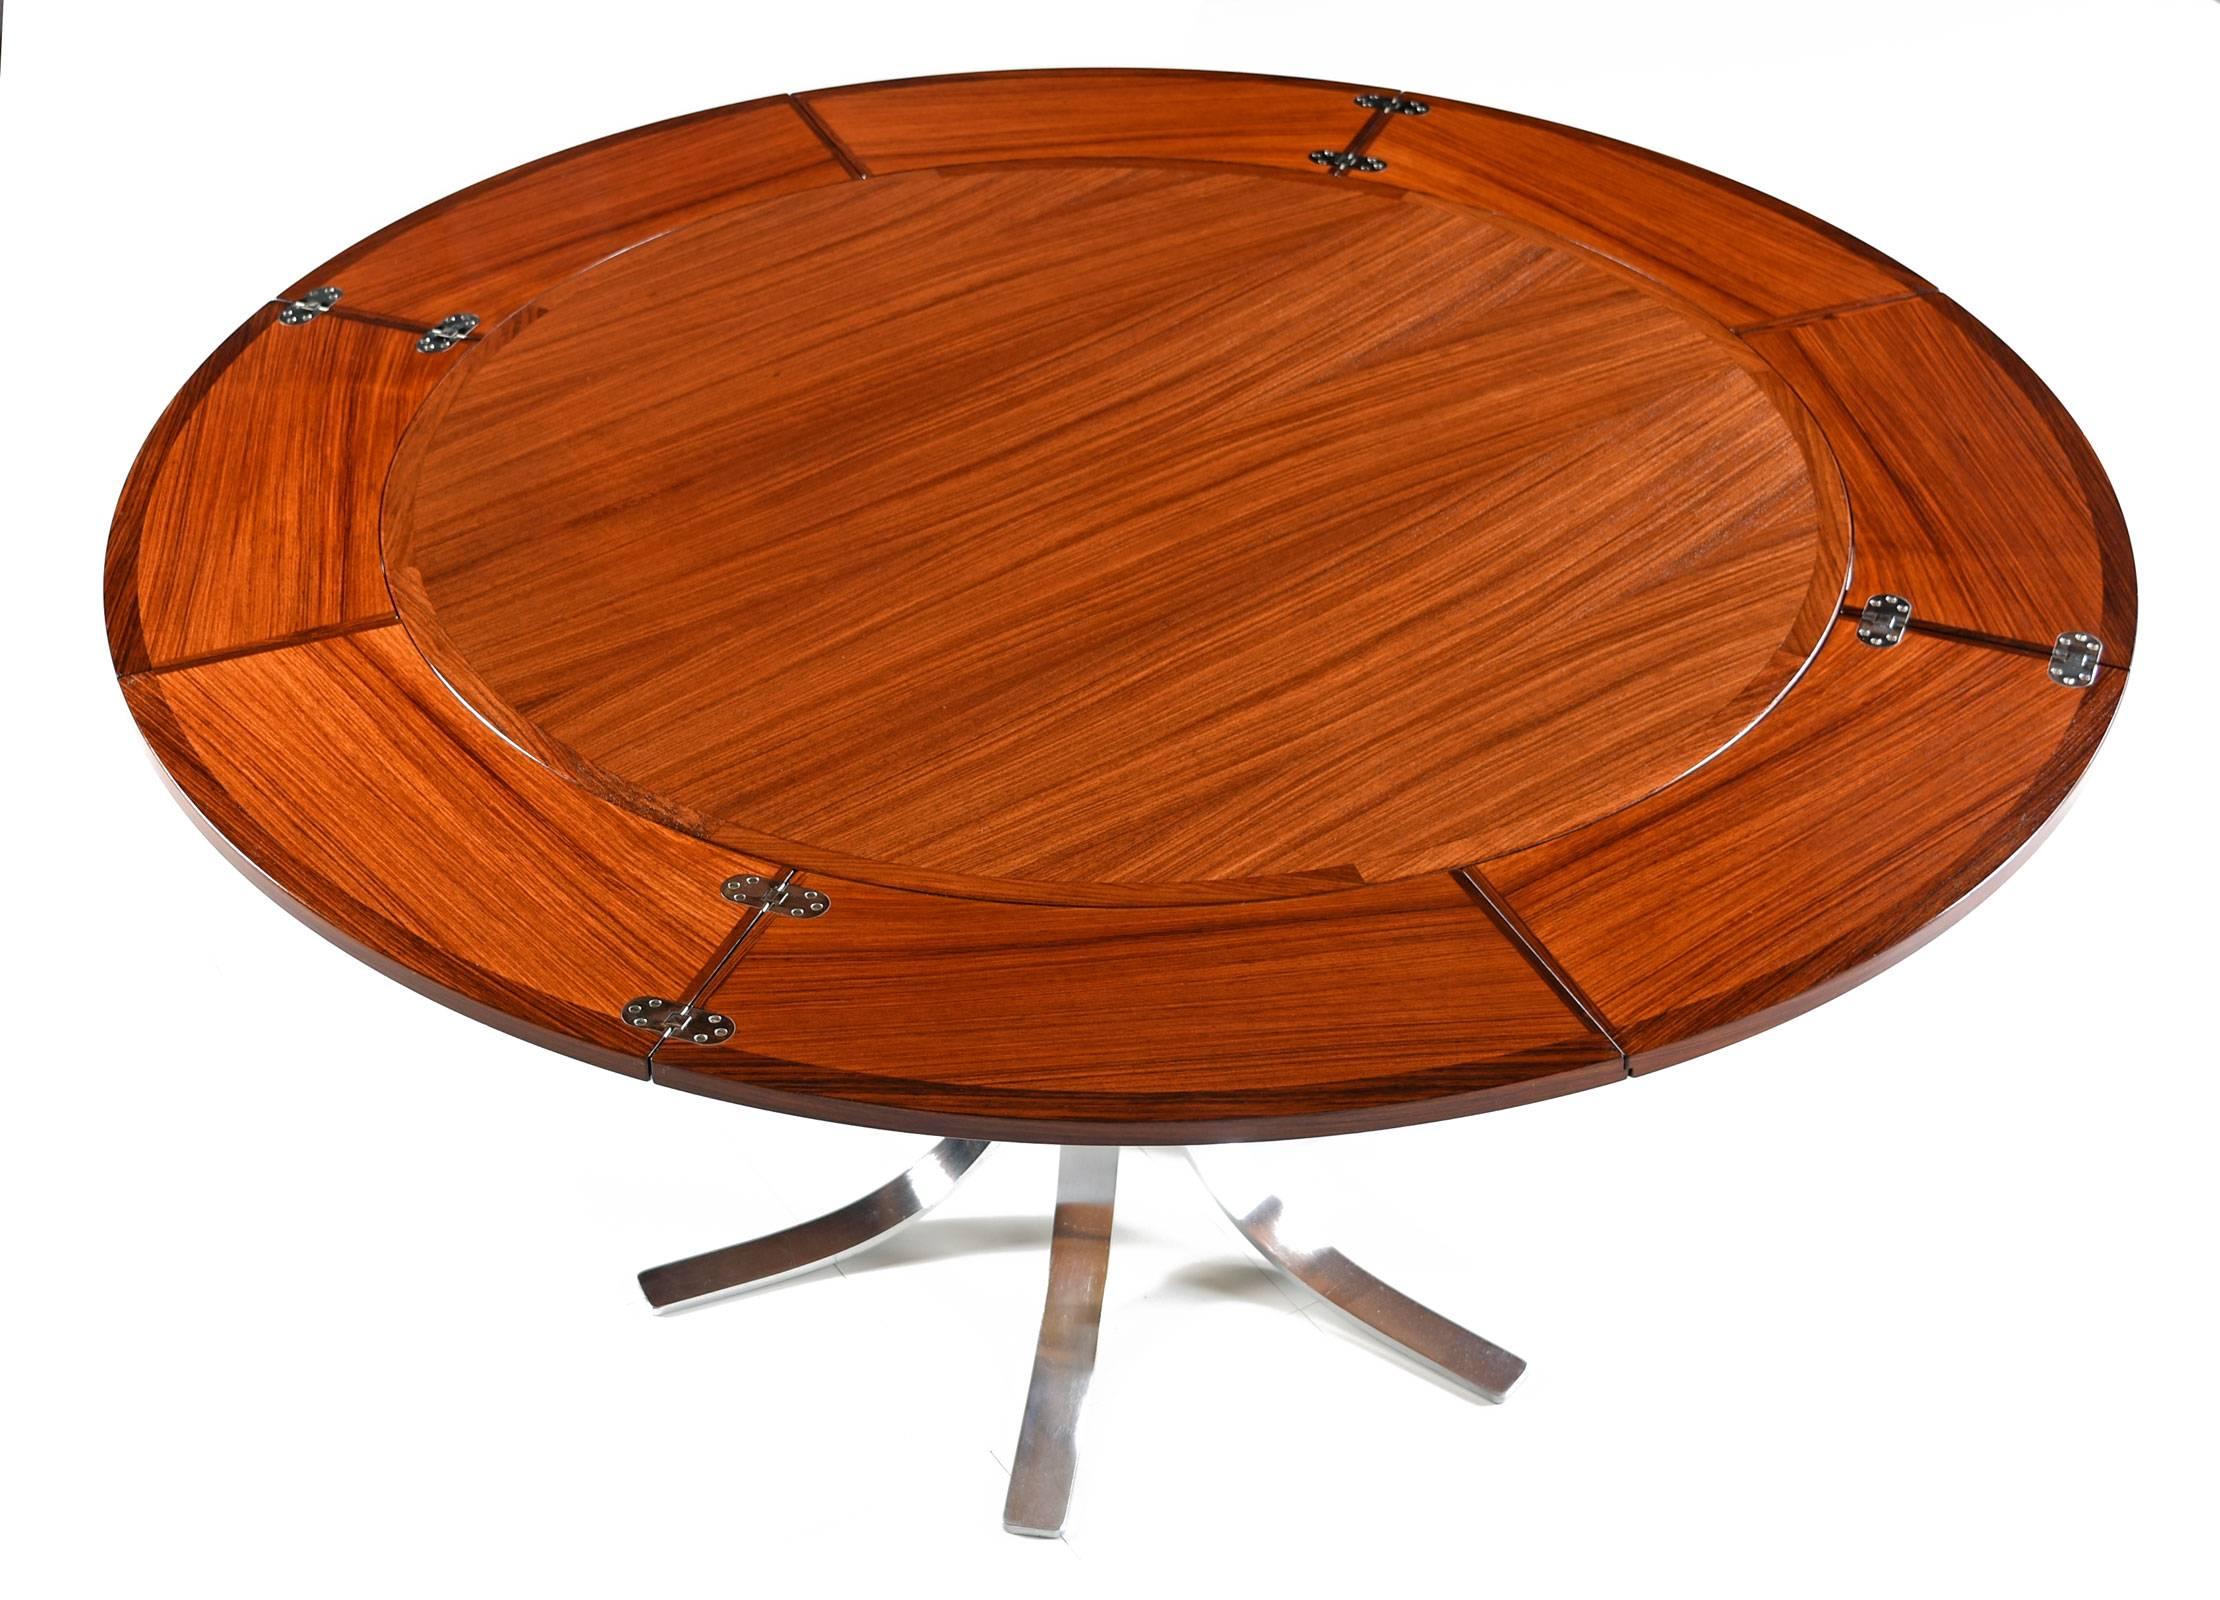 Stunning heirloom quality Mid-Century Modern flip flap table by Dyrlund. Made in Denmark with luxurious rosewood tabletop and sleek chromed steel pedestal base. The table bears the original maker's mark beneath the tabletop. What makes this table so